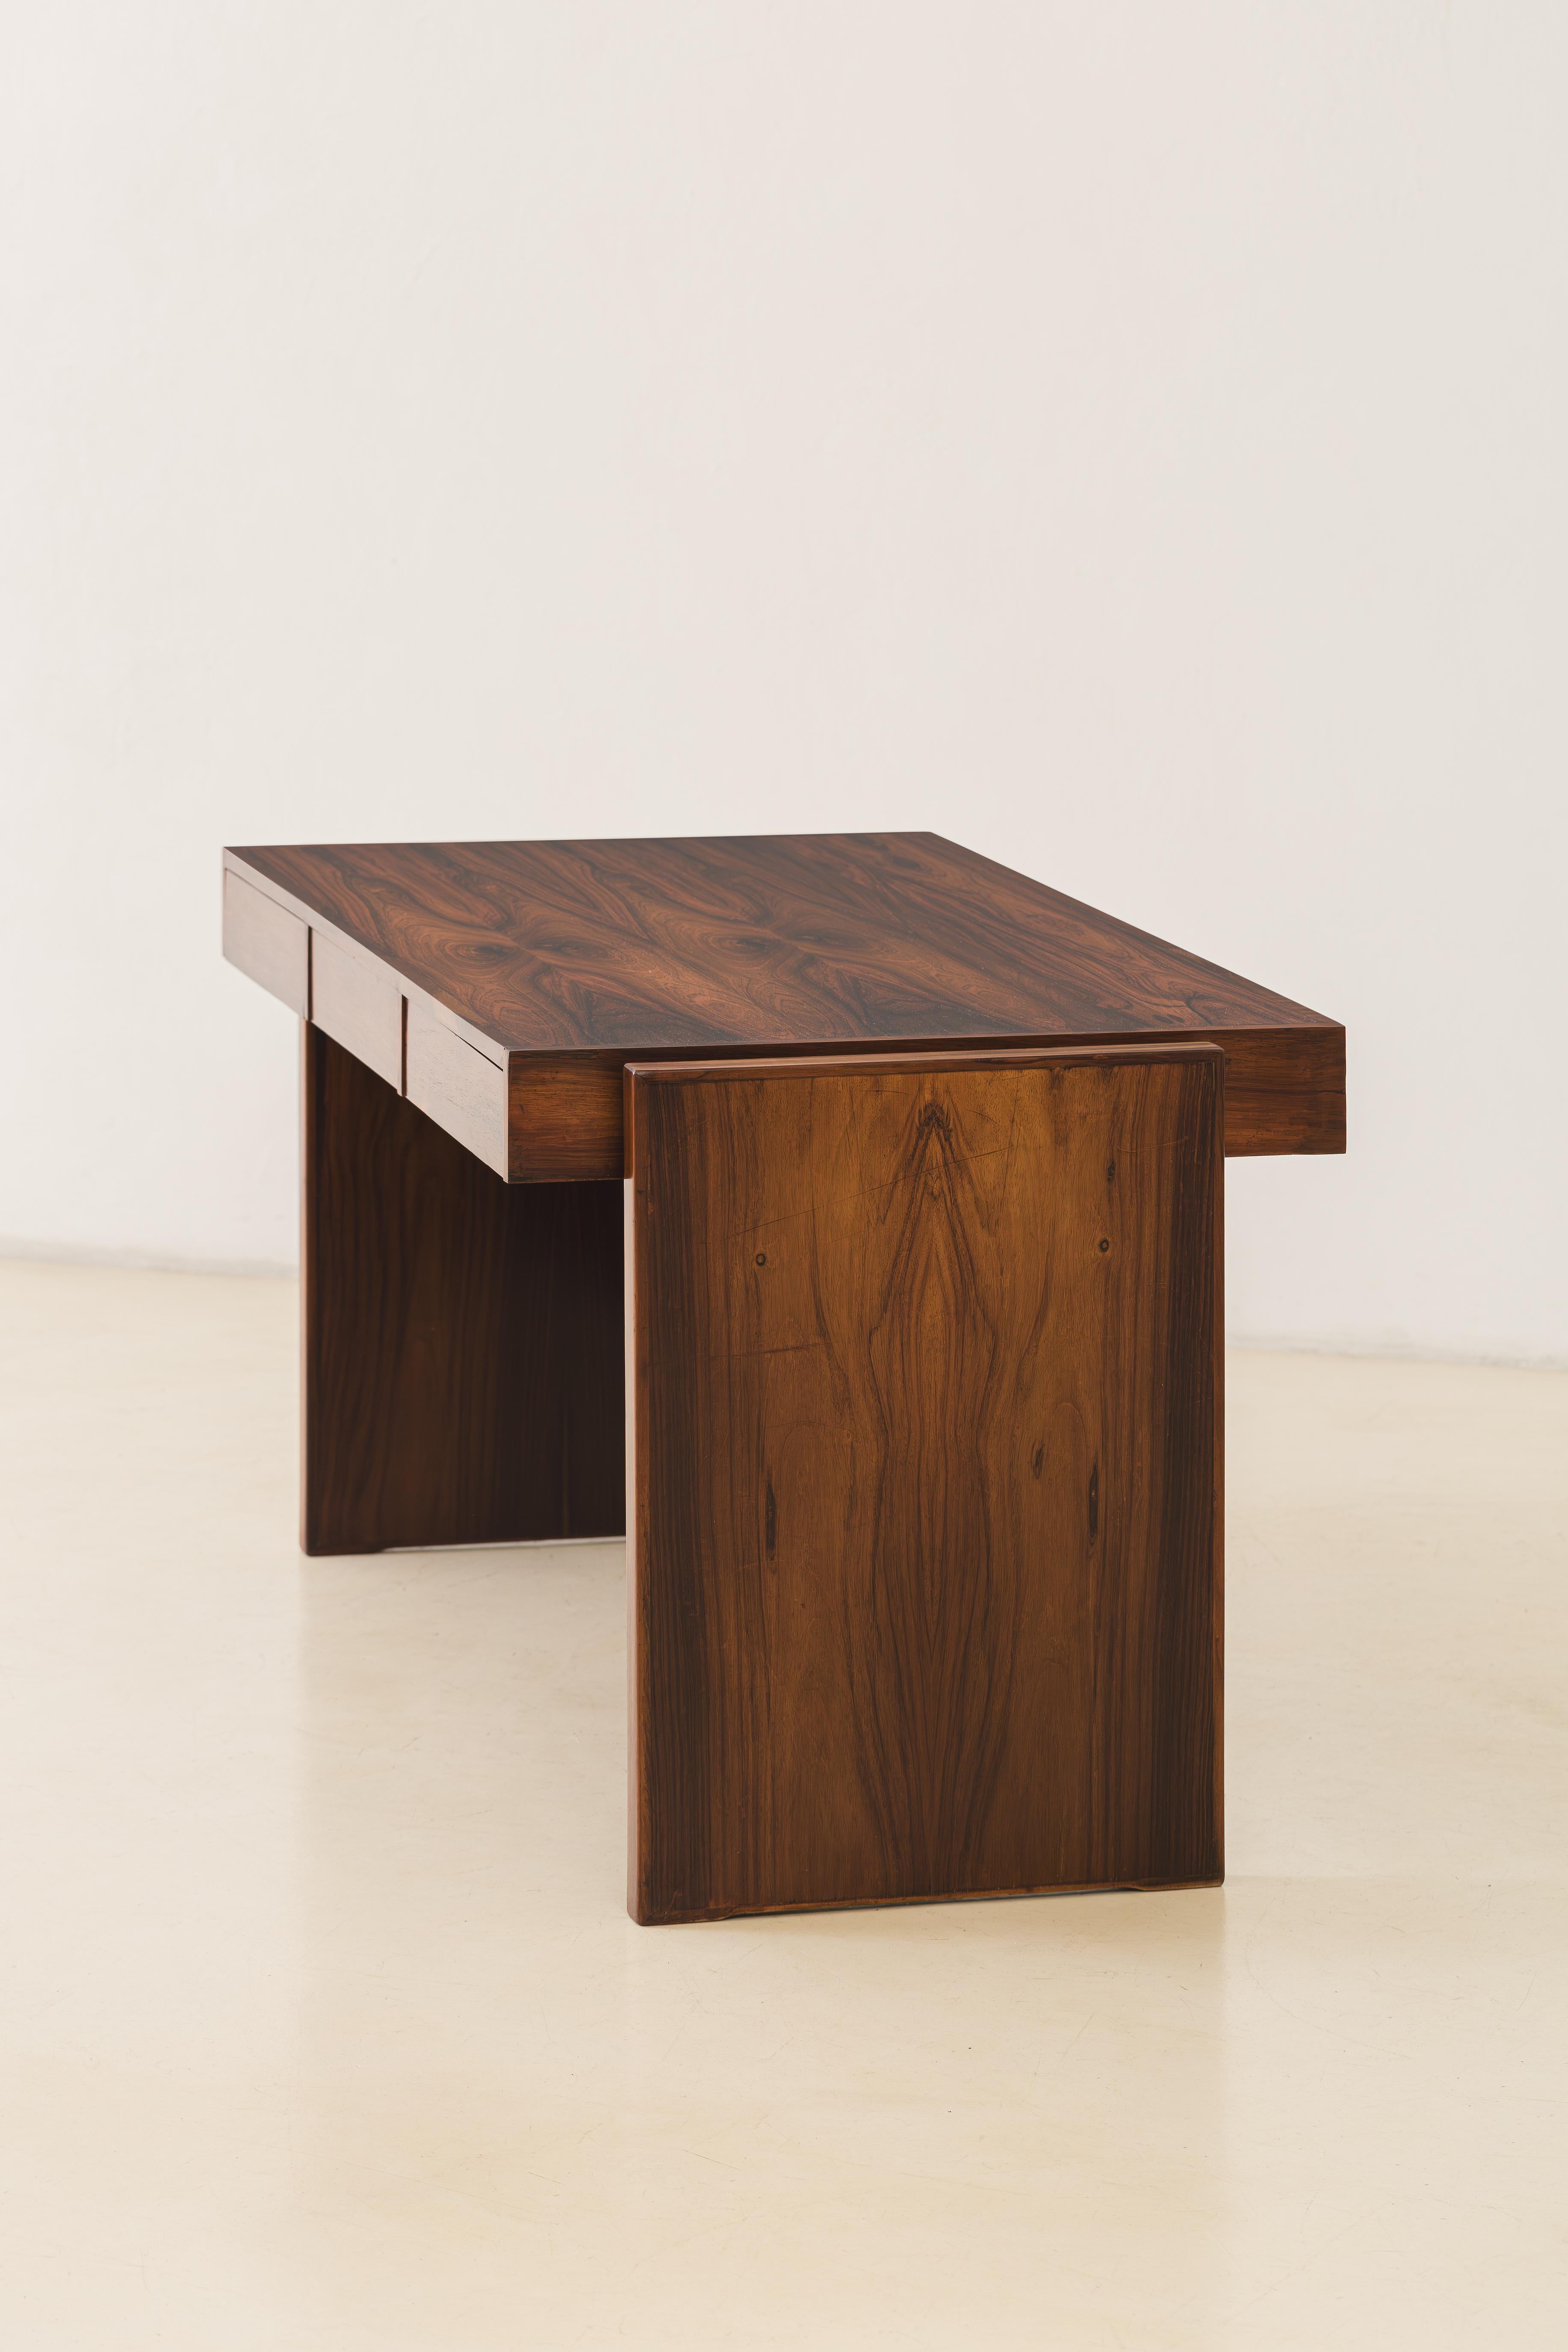 This bloch desk was designed by Joaquim Tenreiro (1906-1992), the “father” of Brazilian modernism, in 1965. The desk offers an interplay of rosewood tones and its elegance is complemented by its functionality, as it has three spacious drawers to